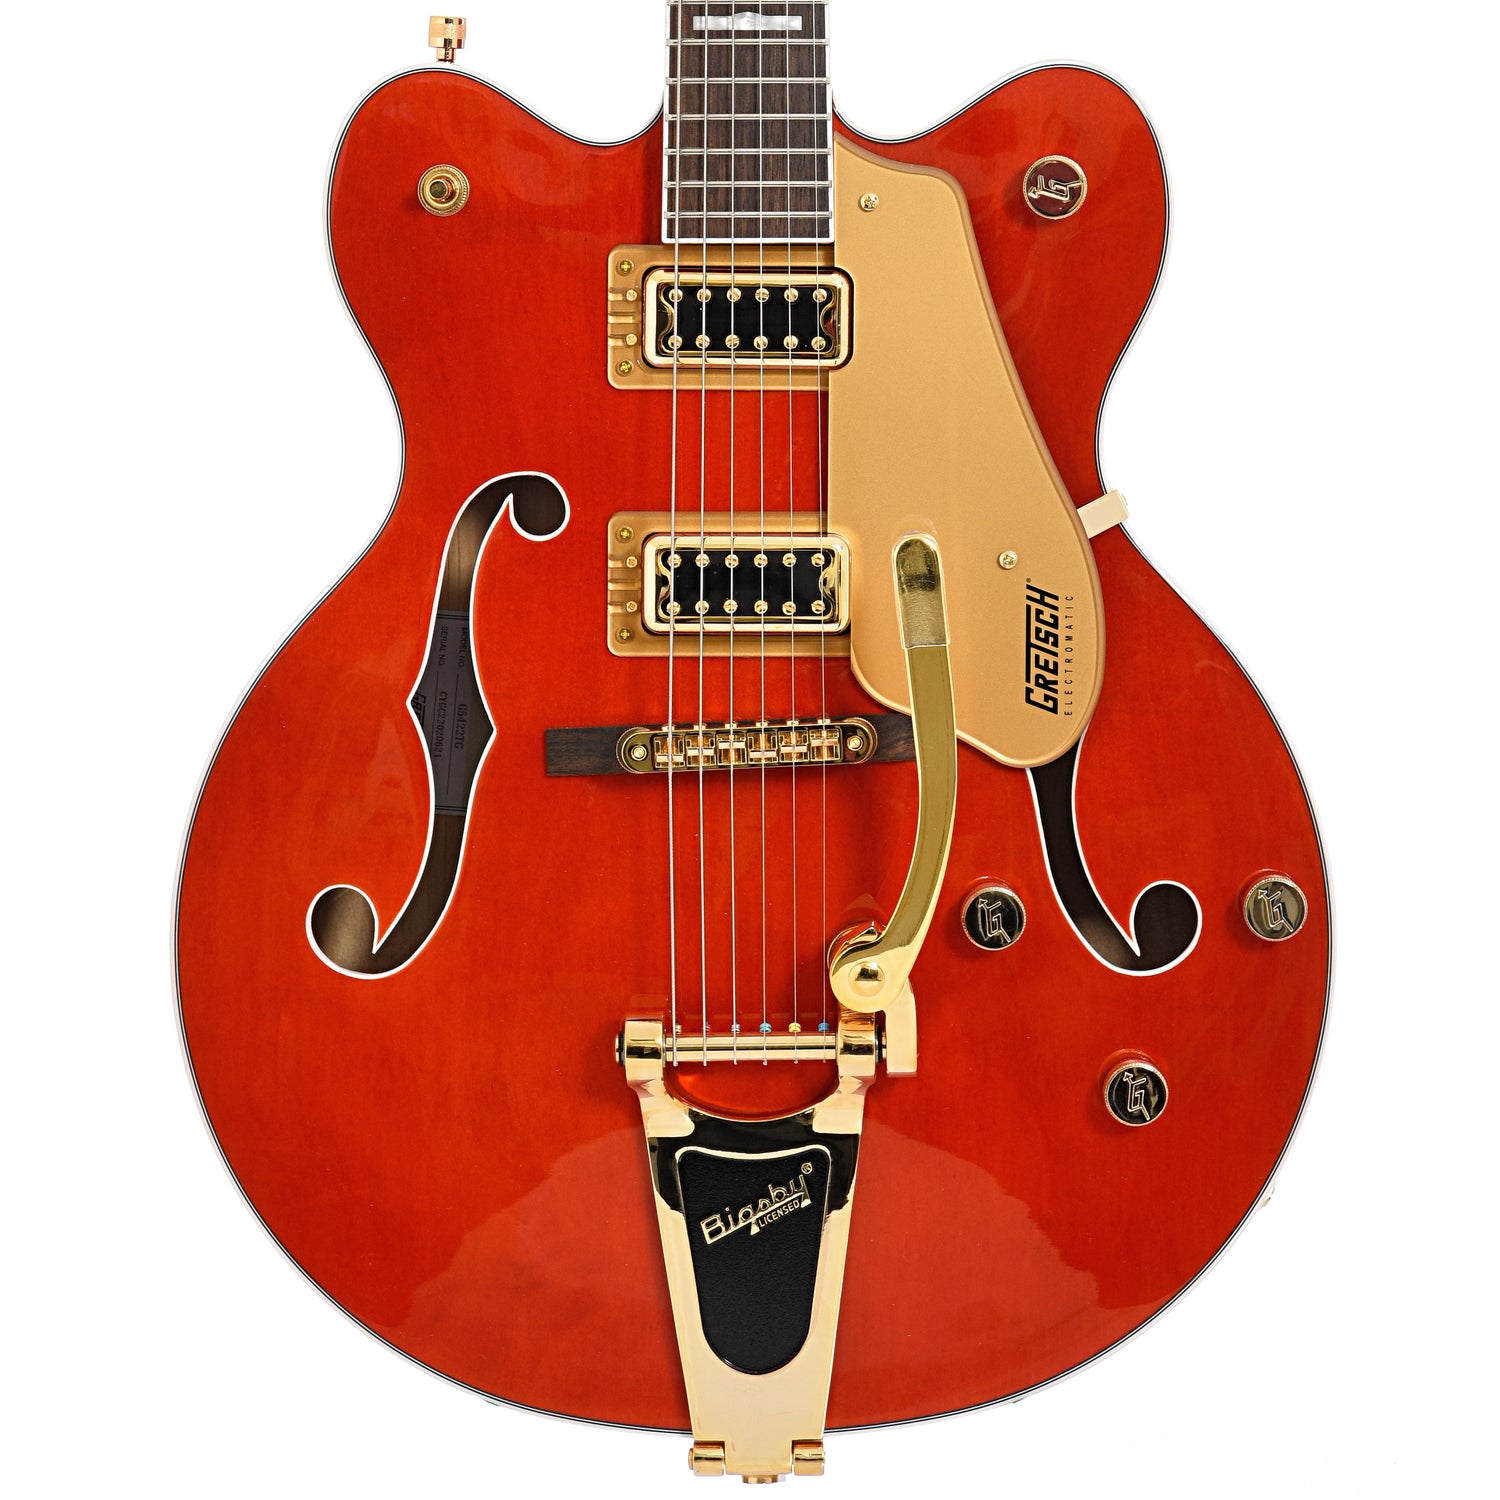 Image 2 of Gretsch G5422TG Electromatic Classic Hollow Body Double Cut with Bigsby, Orange Stain- SKU# G5422TG-ORN : Product Type Hollow Body Electric Guitars : Elderly Instruments